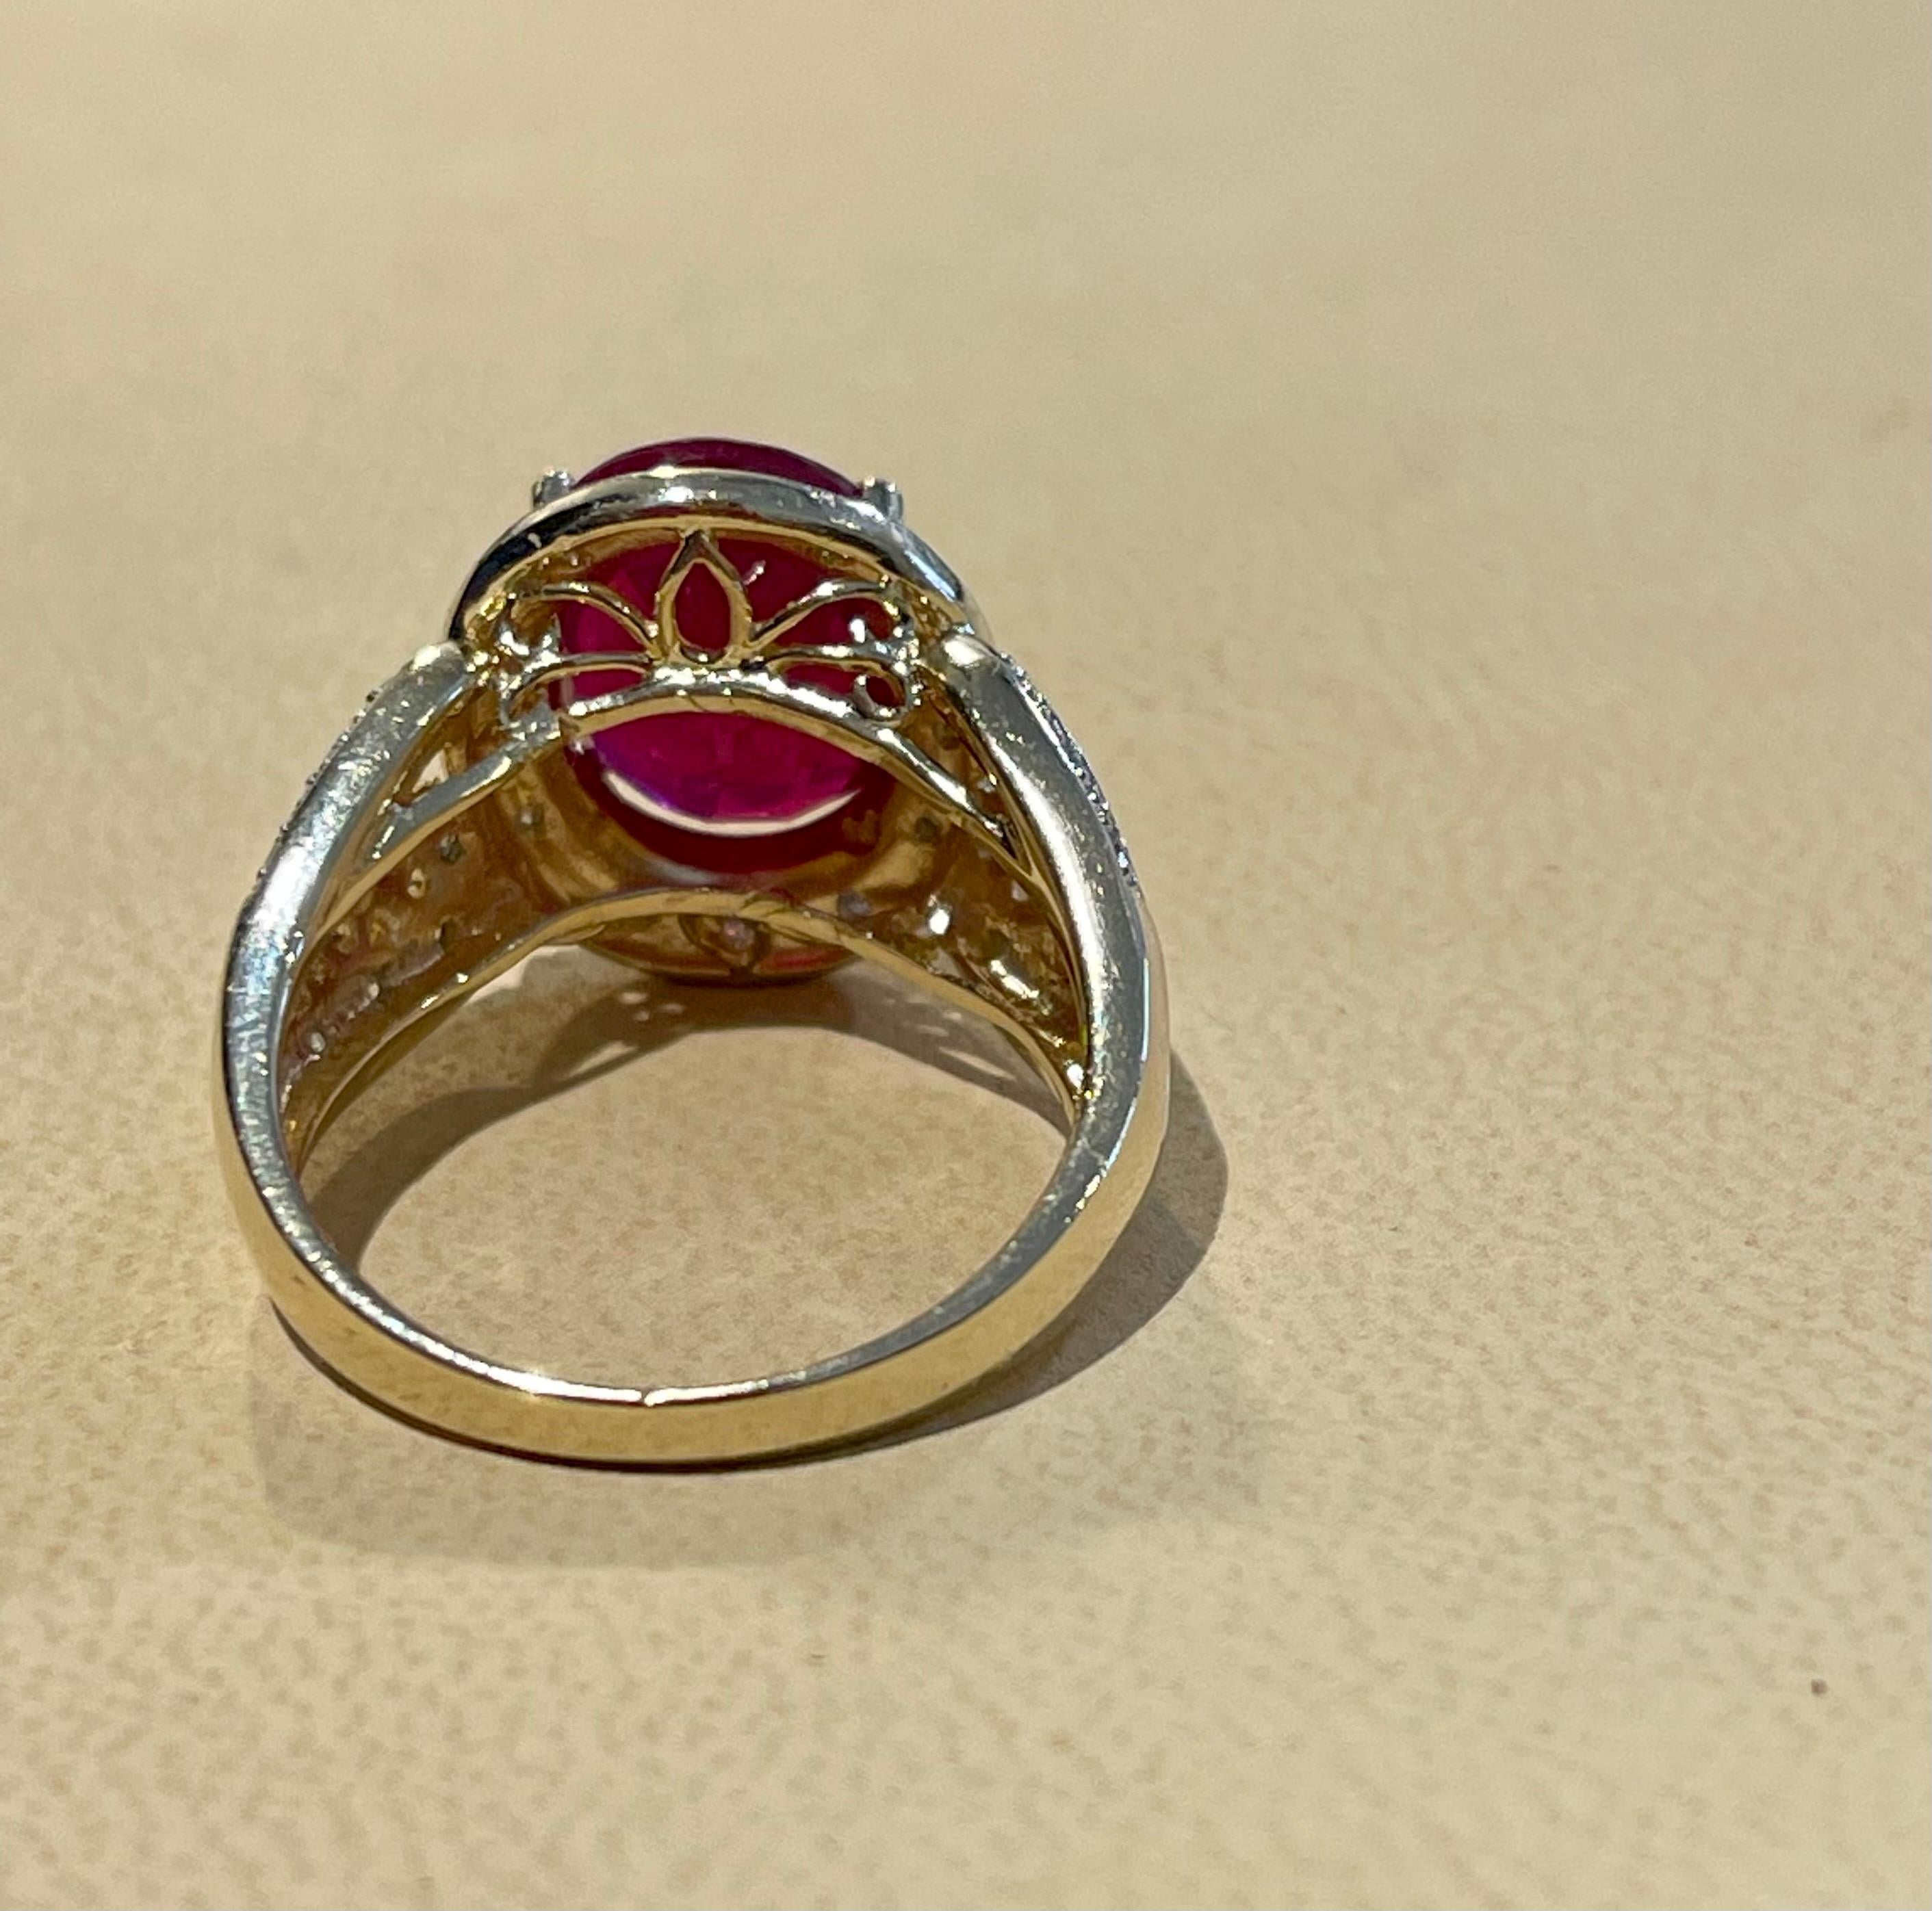 Oval 7.5 Carat Treated Ruby and 1 Carat Diamond 14 Karat Yellow Gold Ring For Sale 4